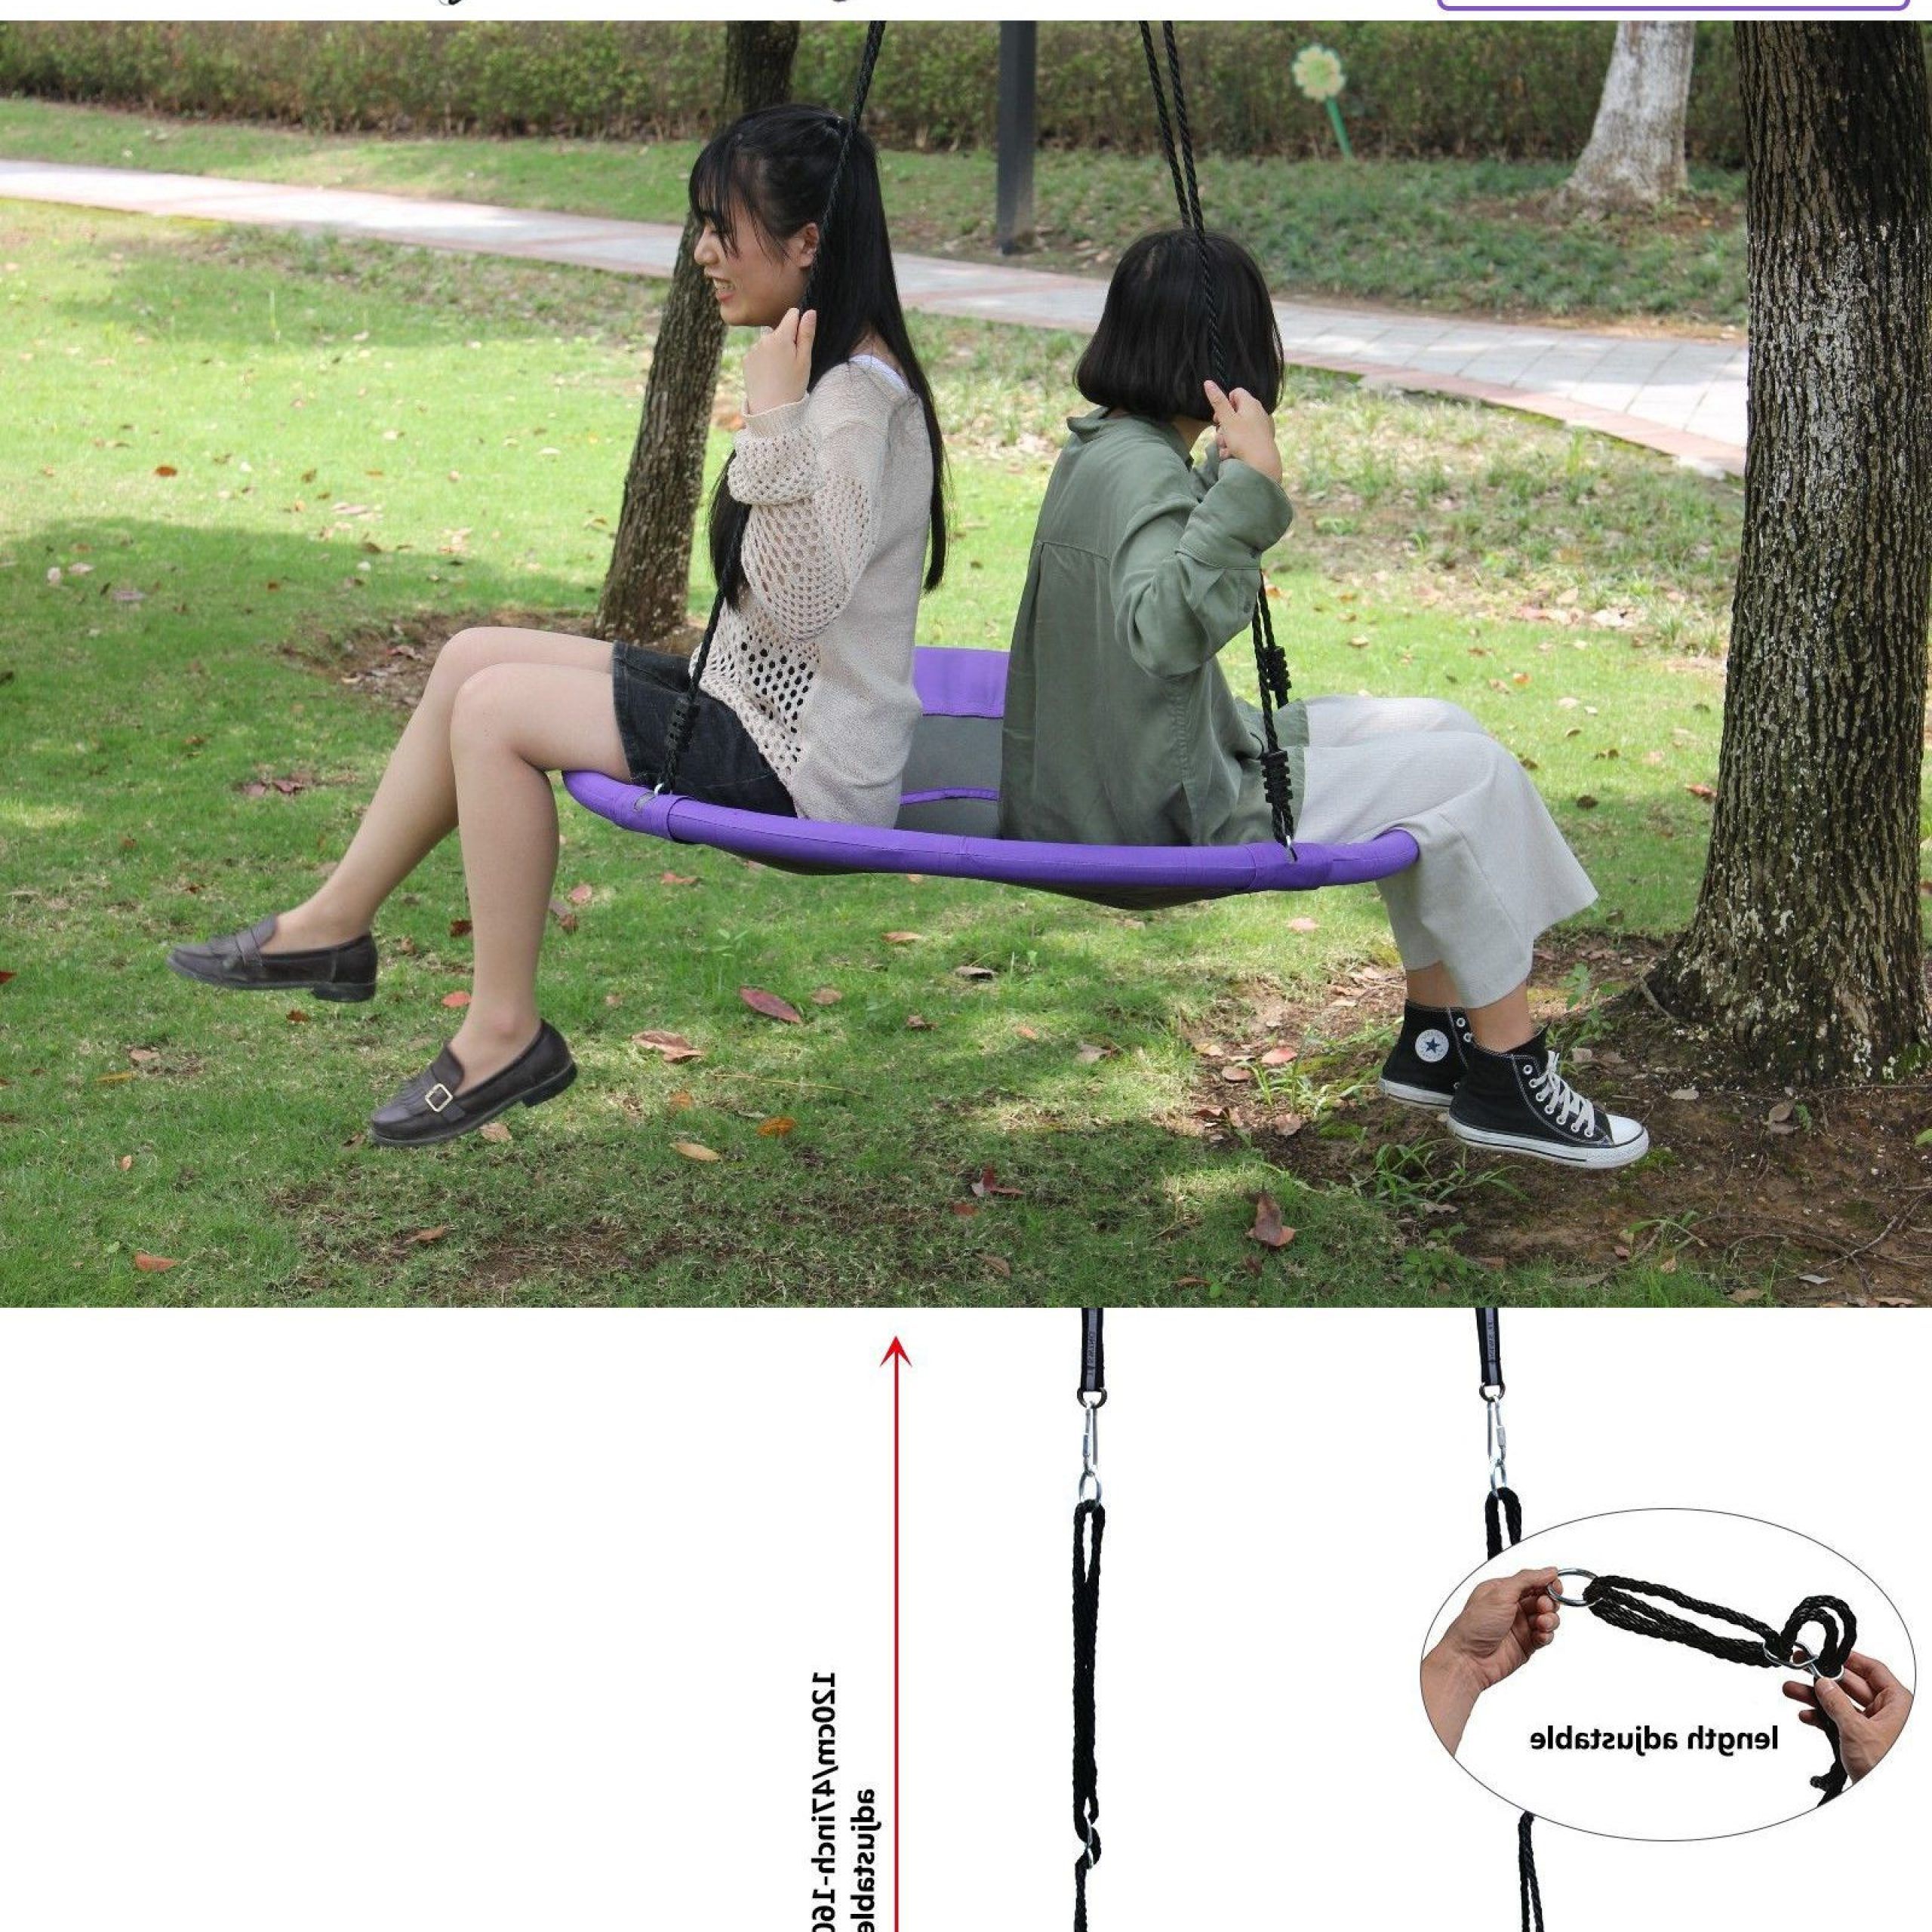 Nest Swings With Adjustable Ropes Intended For Well Known Patio & Garden Furniture Patio Chairs, Swings & Benches  (View 30 of 30)